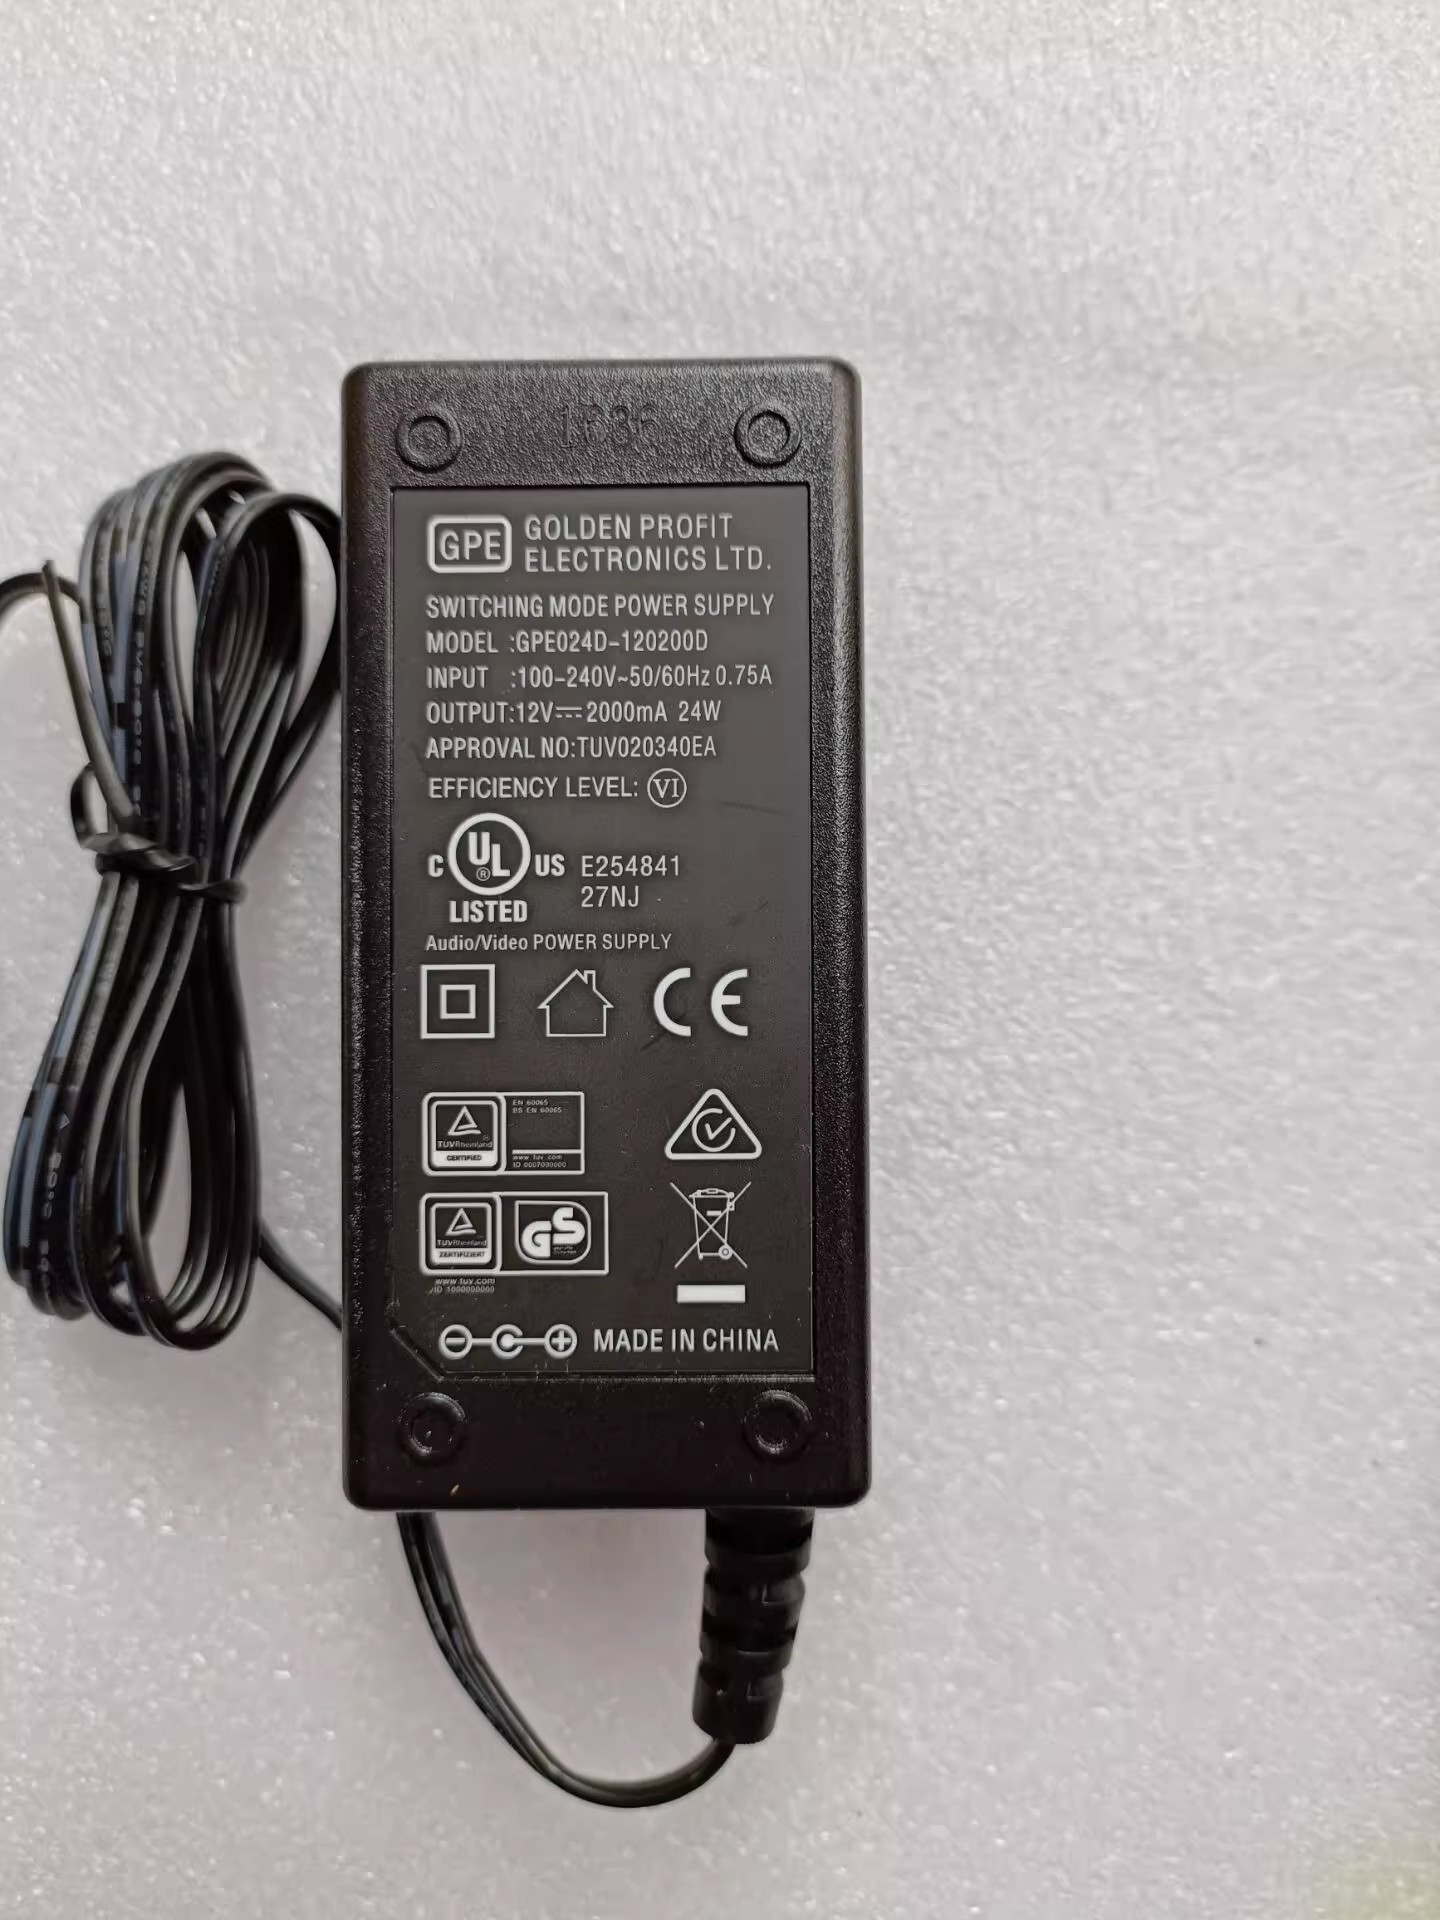 *Brand NEW* GPE GPE024D-120200D 12V 2000MA AC DC ADAPTHE POWER Supply